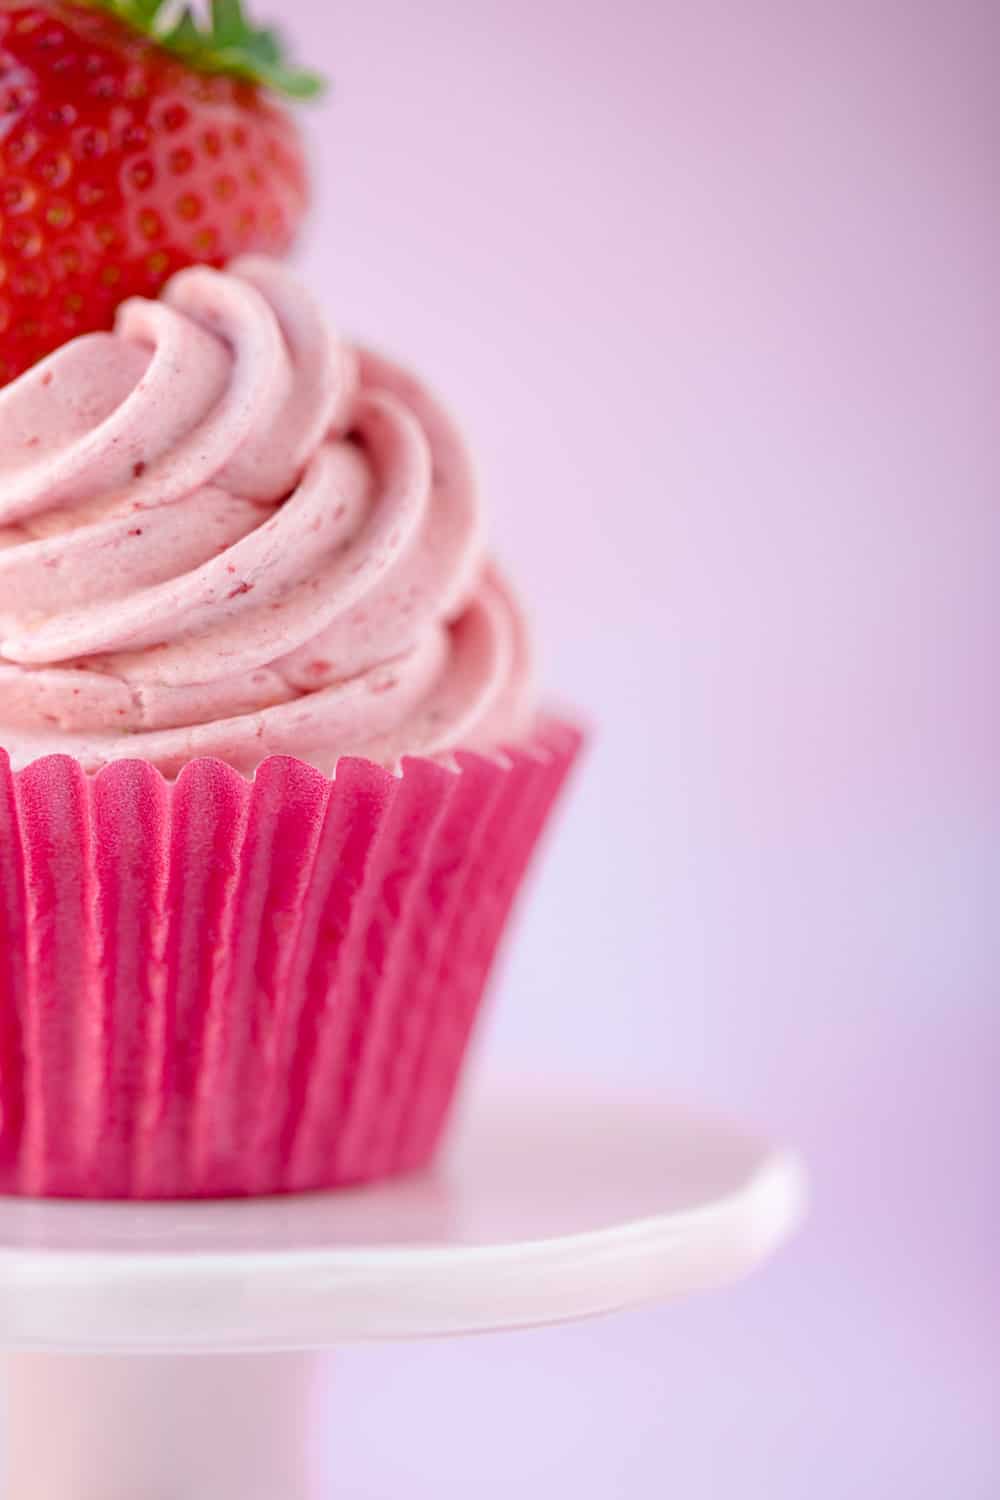 Side profile of a pink strawberry cupcake